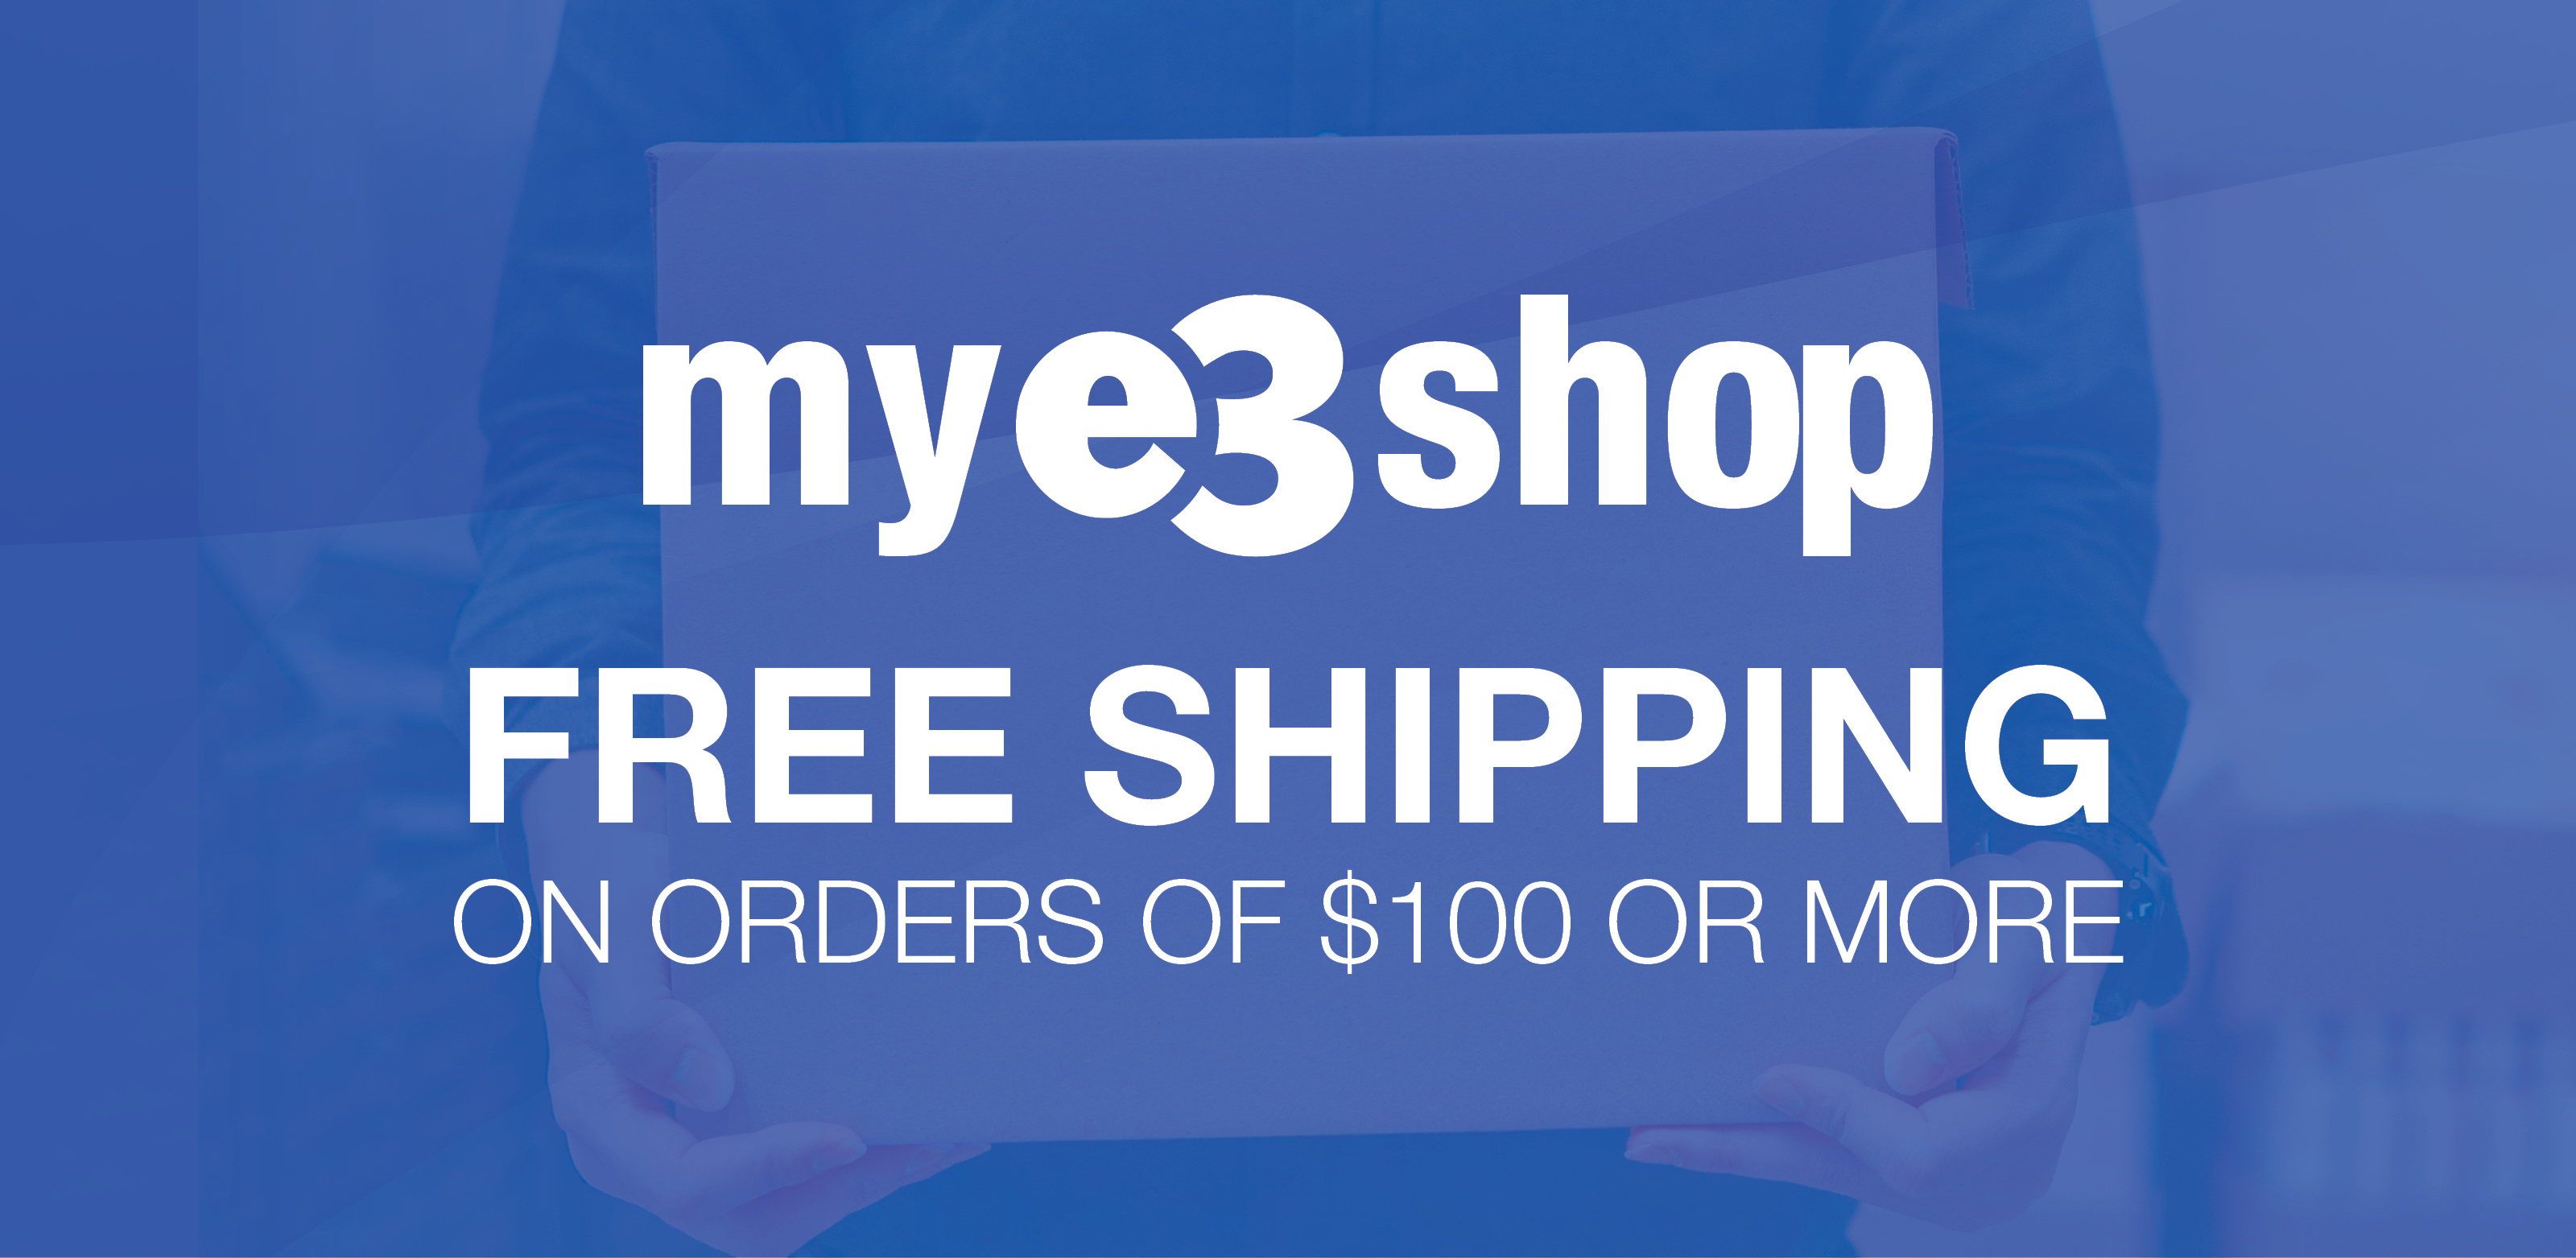 Free Shipping Sitewide